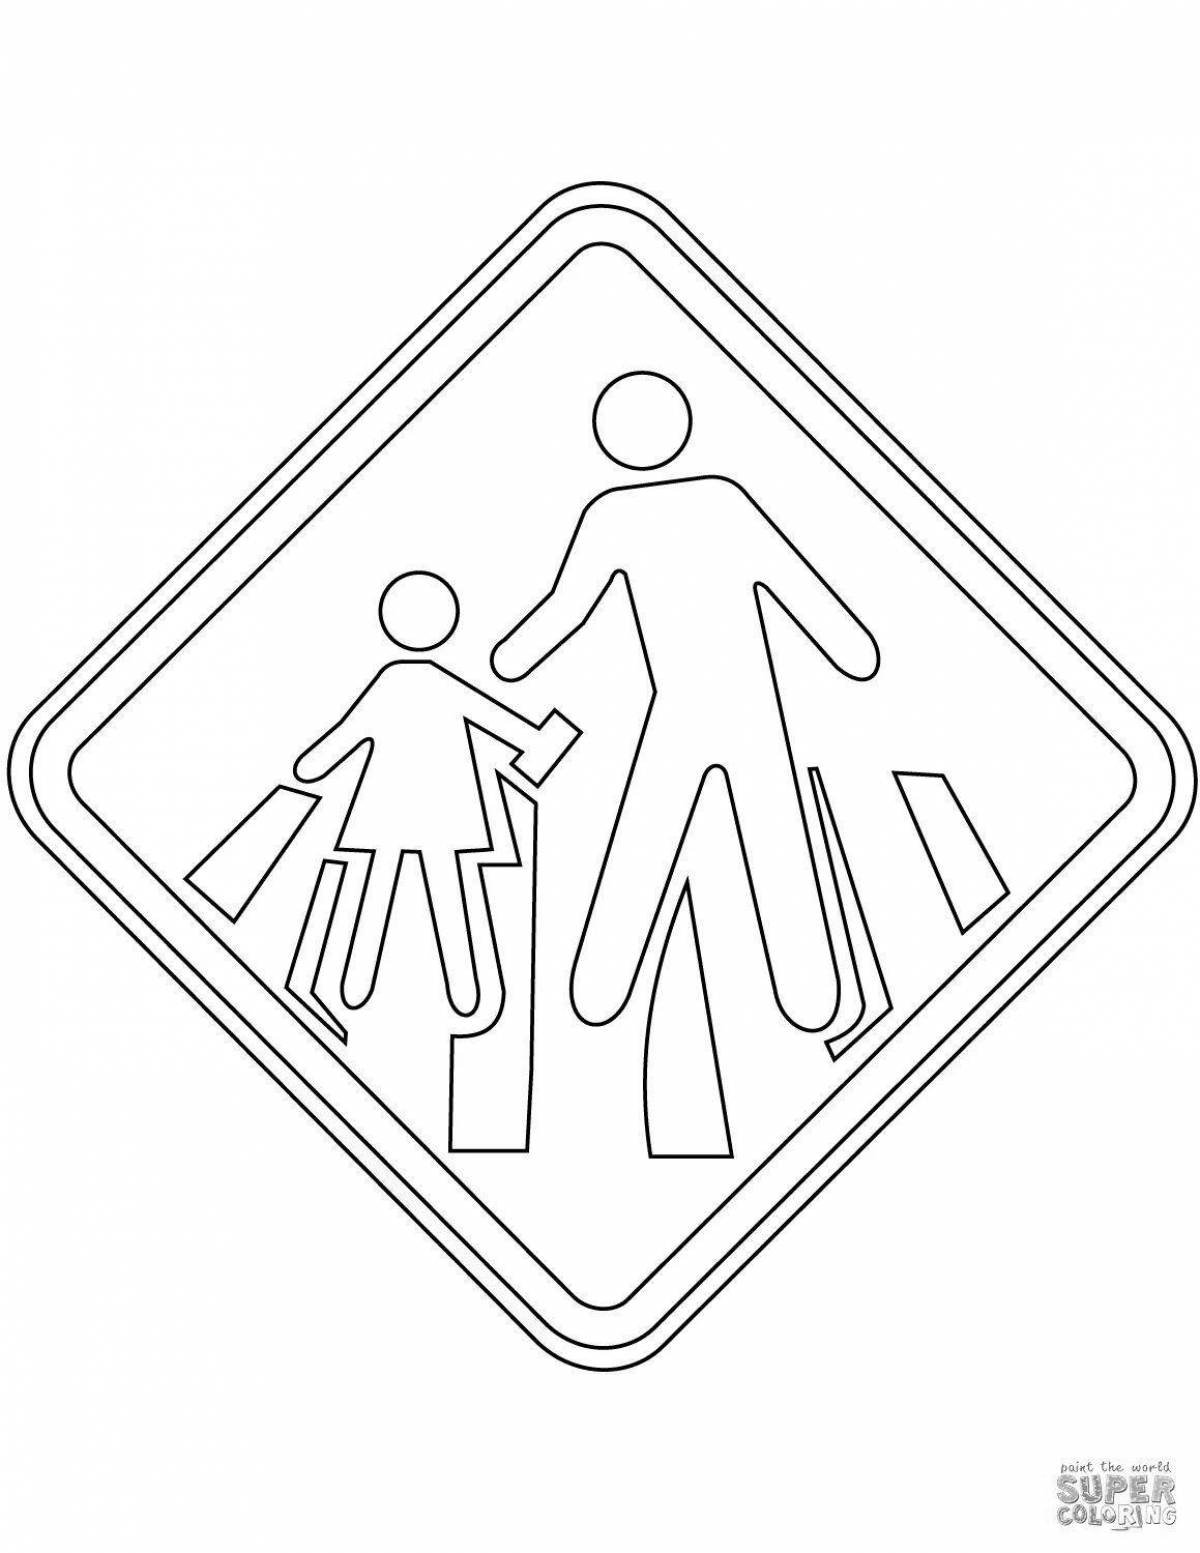 Playful pedestrian signs coloring page